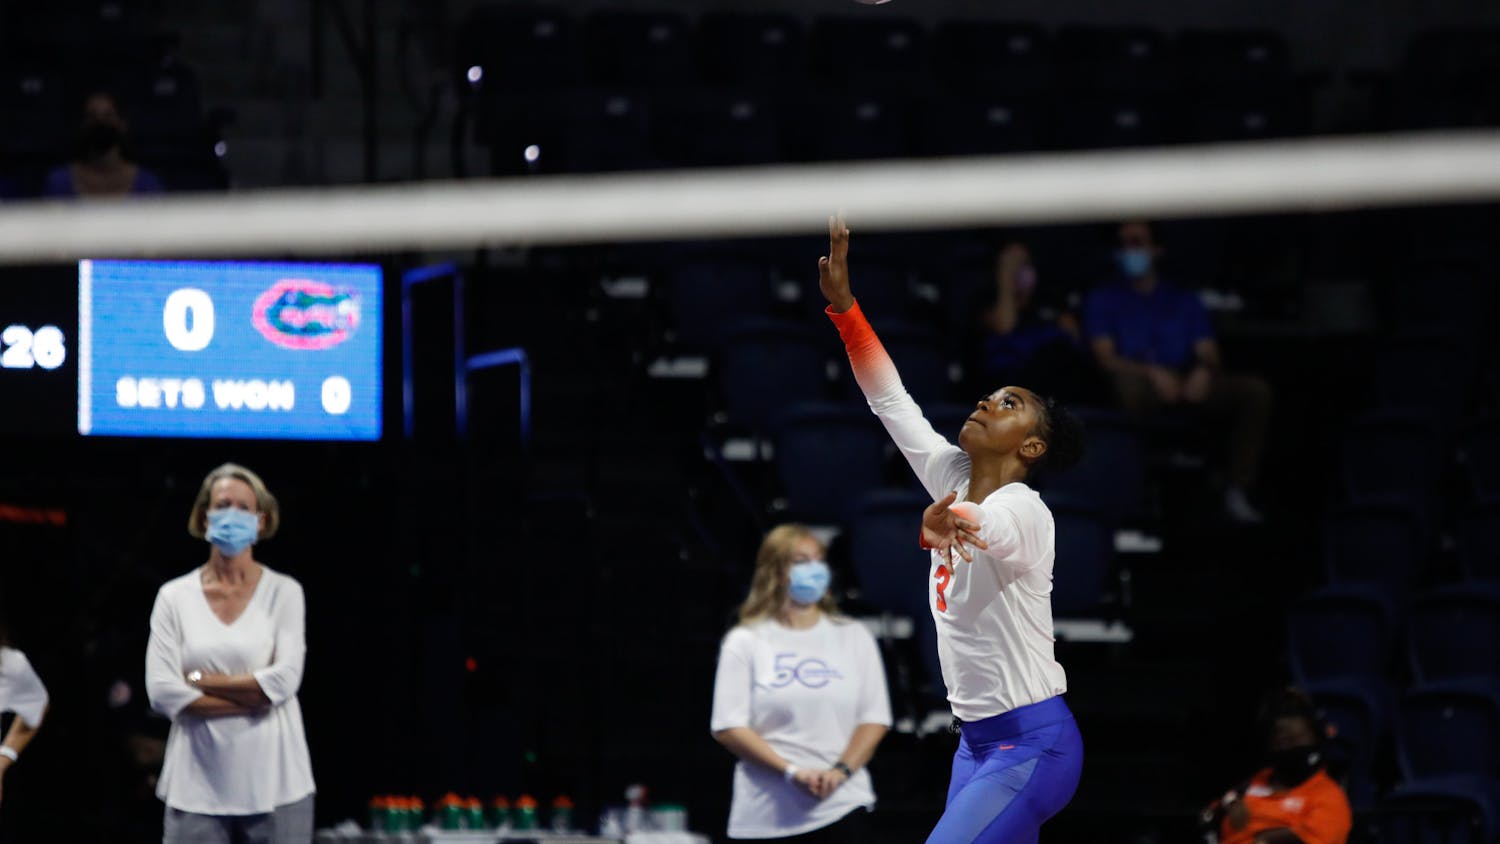 Florida's T'ara Ceasar readies to serve against Mississippi State on Sept. 24.